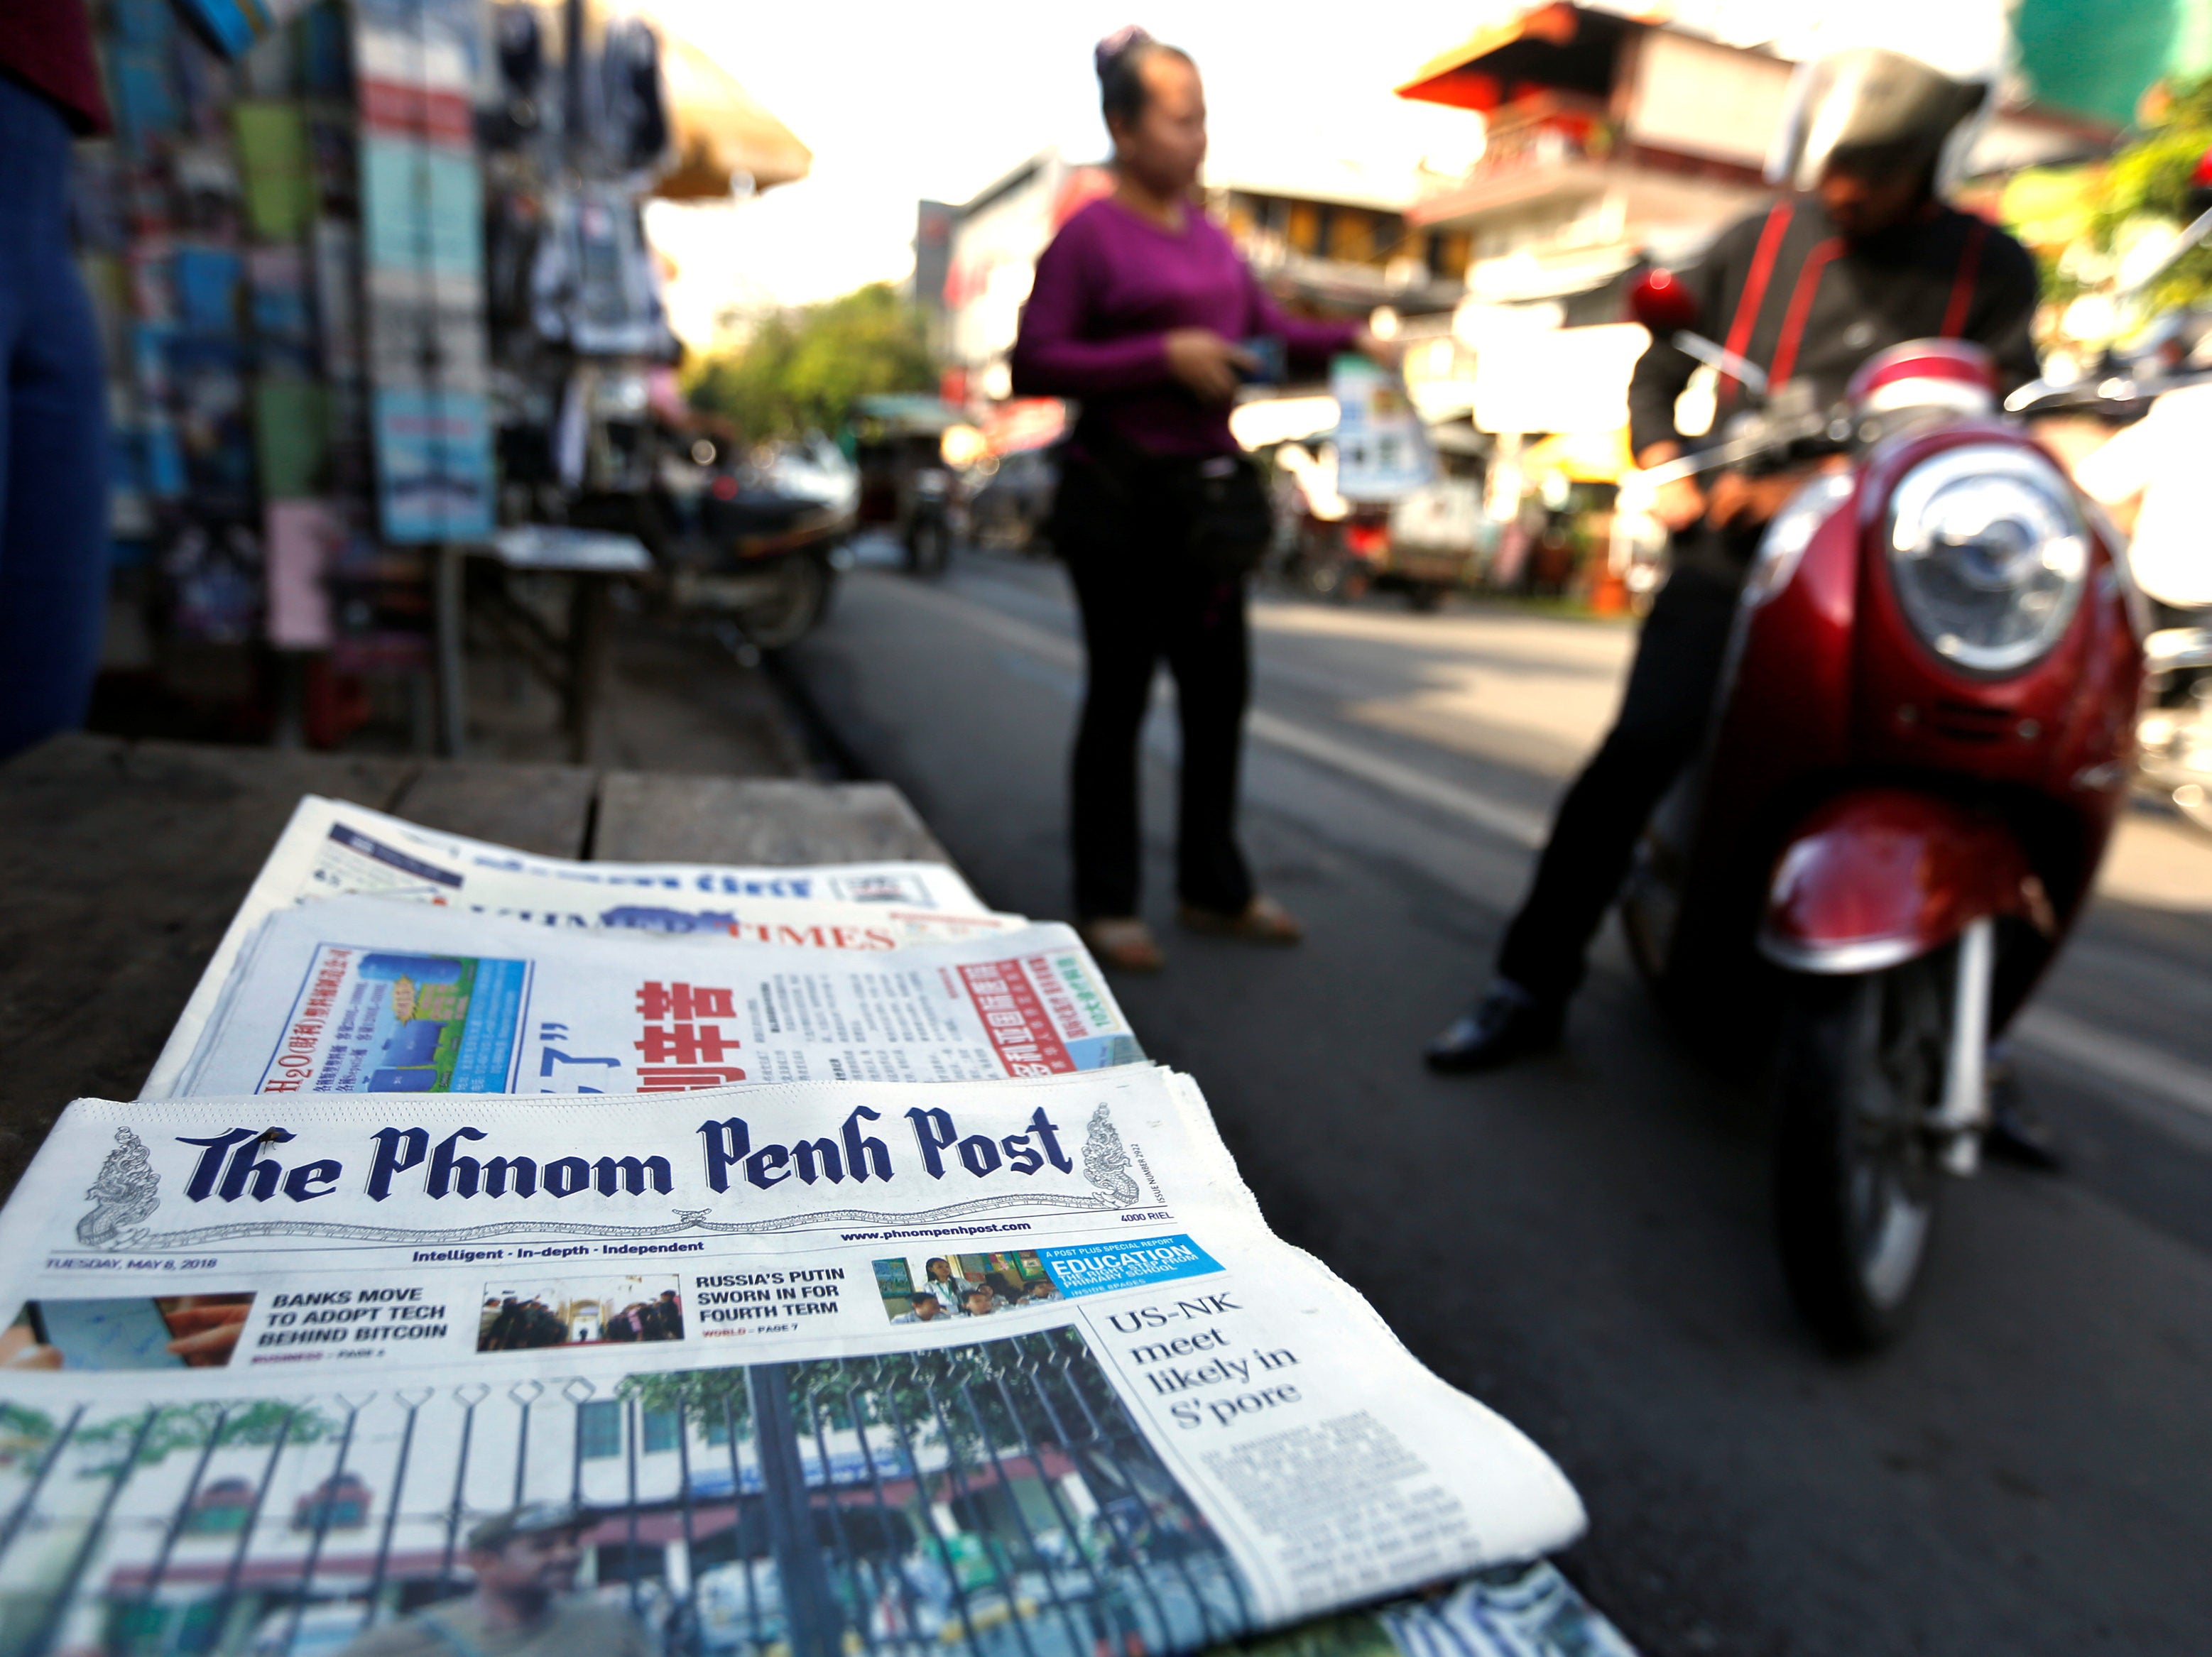 Former Phnom Penh Post journalist describes state of press freedom in Cambodia as ‘dire’